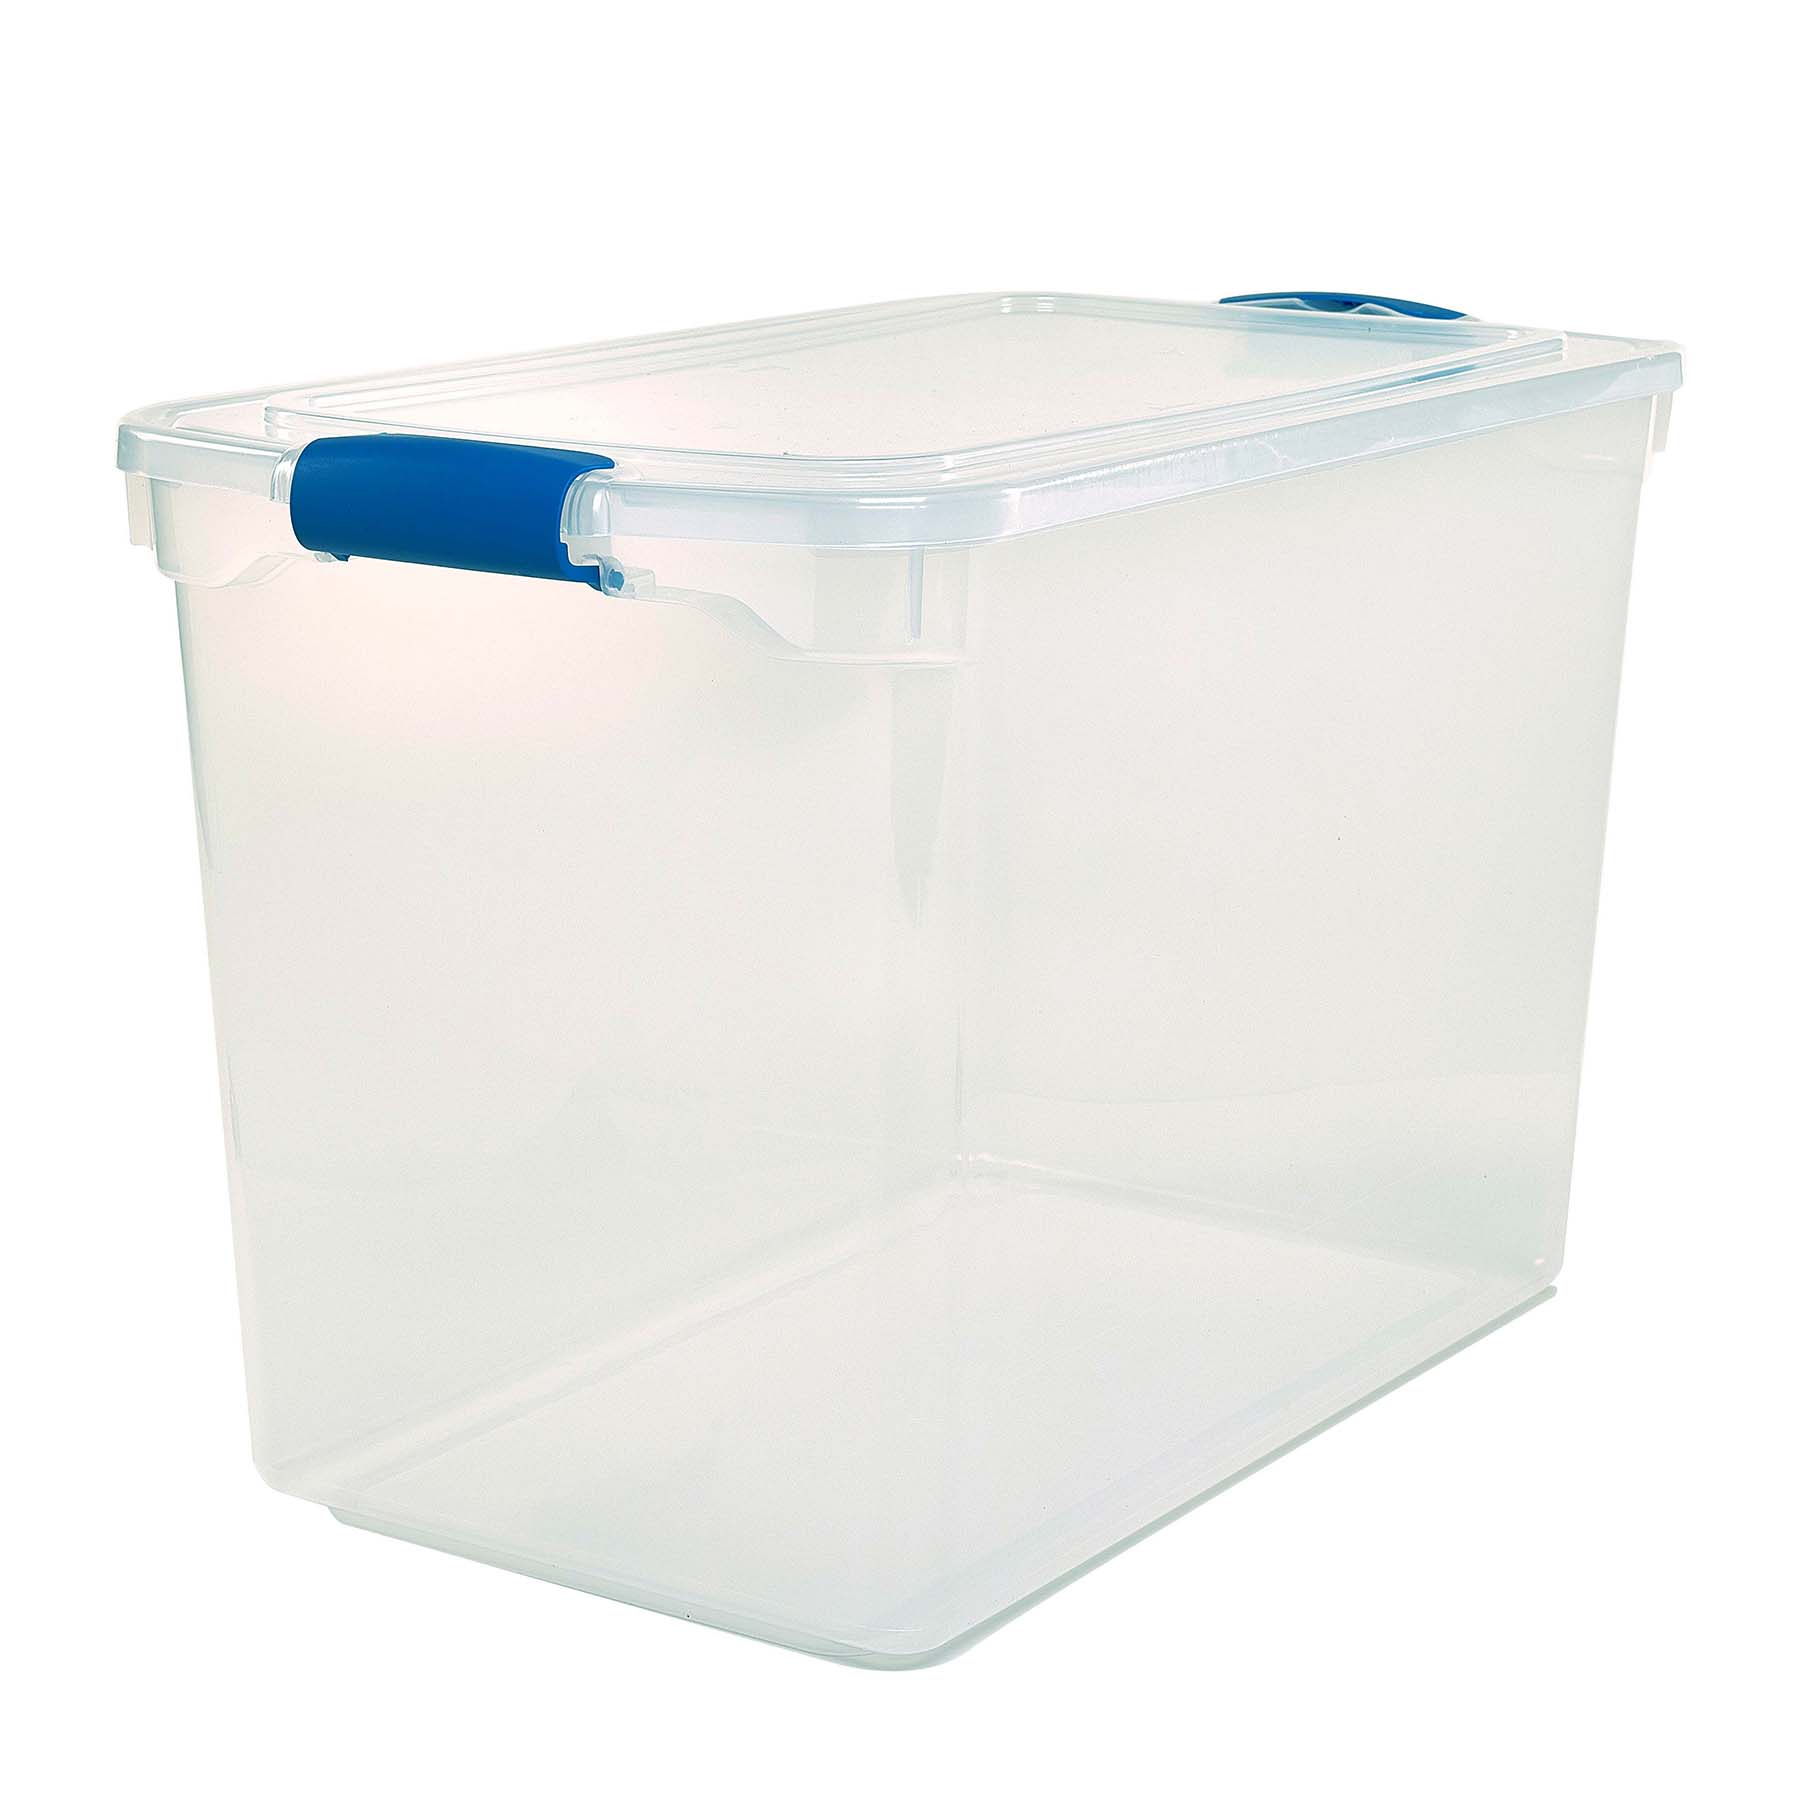 Homz 28 Gallon Stackable Latching Plastic Storage Boxes, Blue and Clear, 6 Count - image 1 of 7